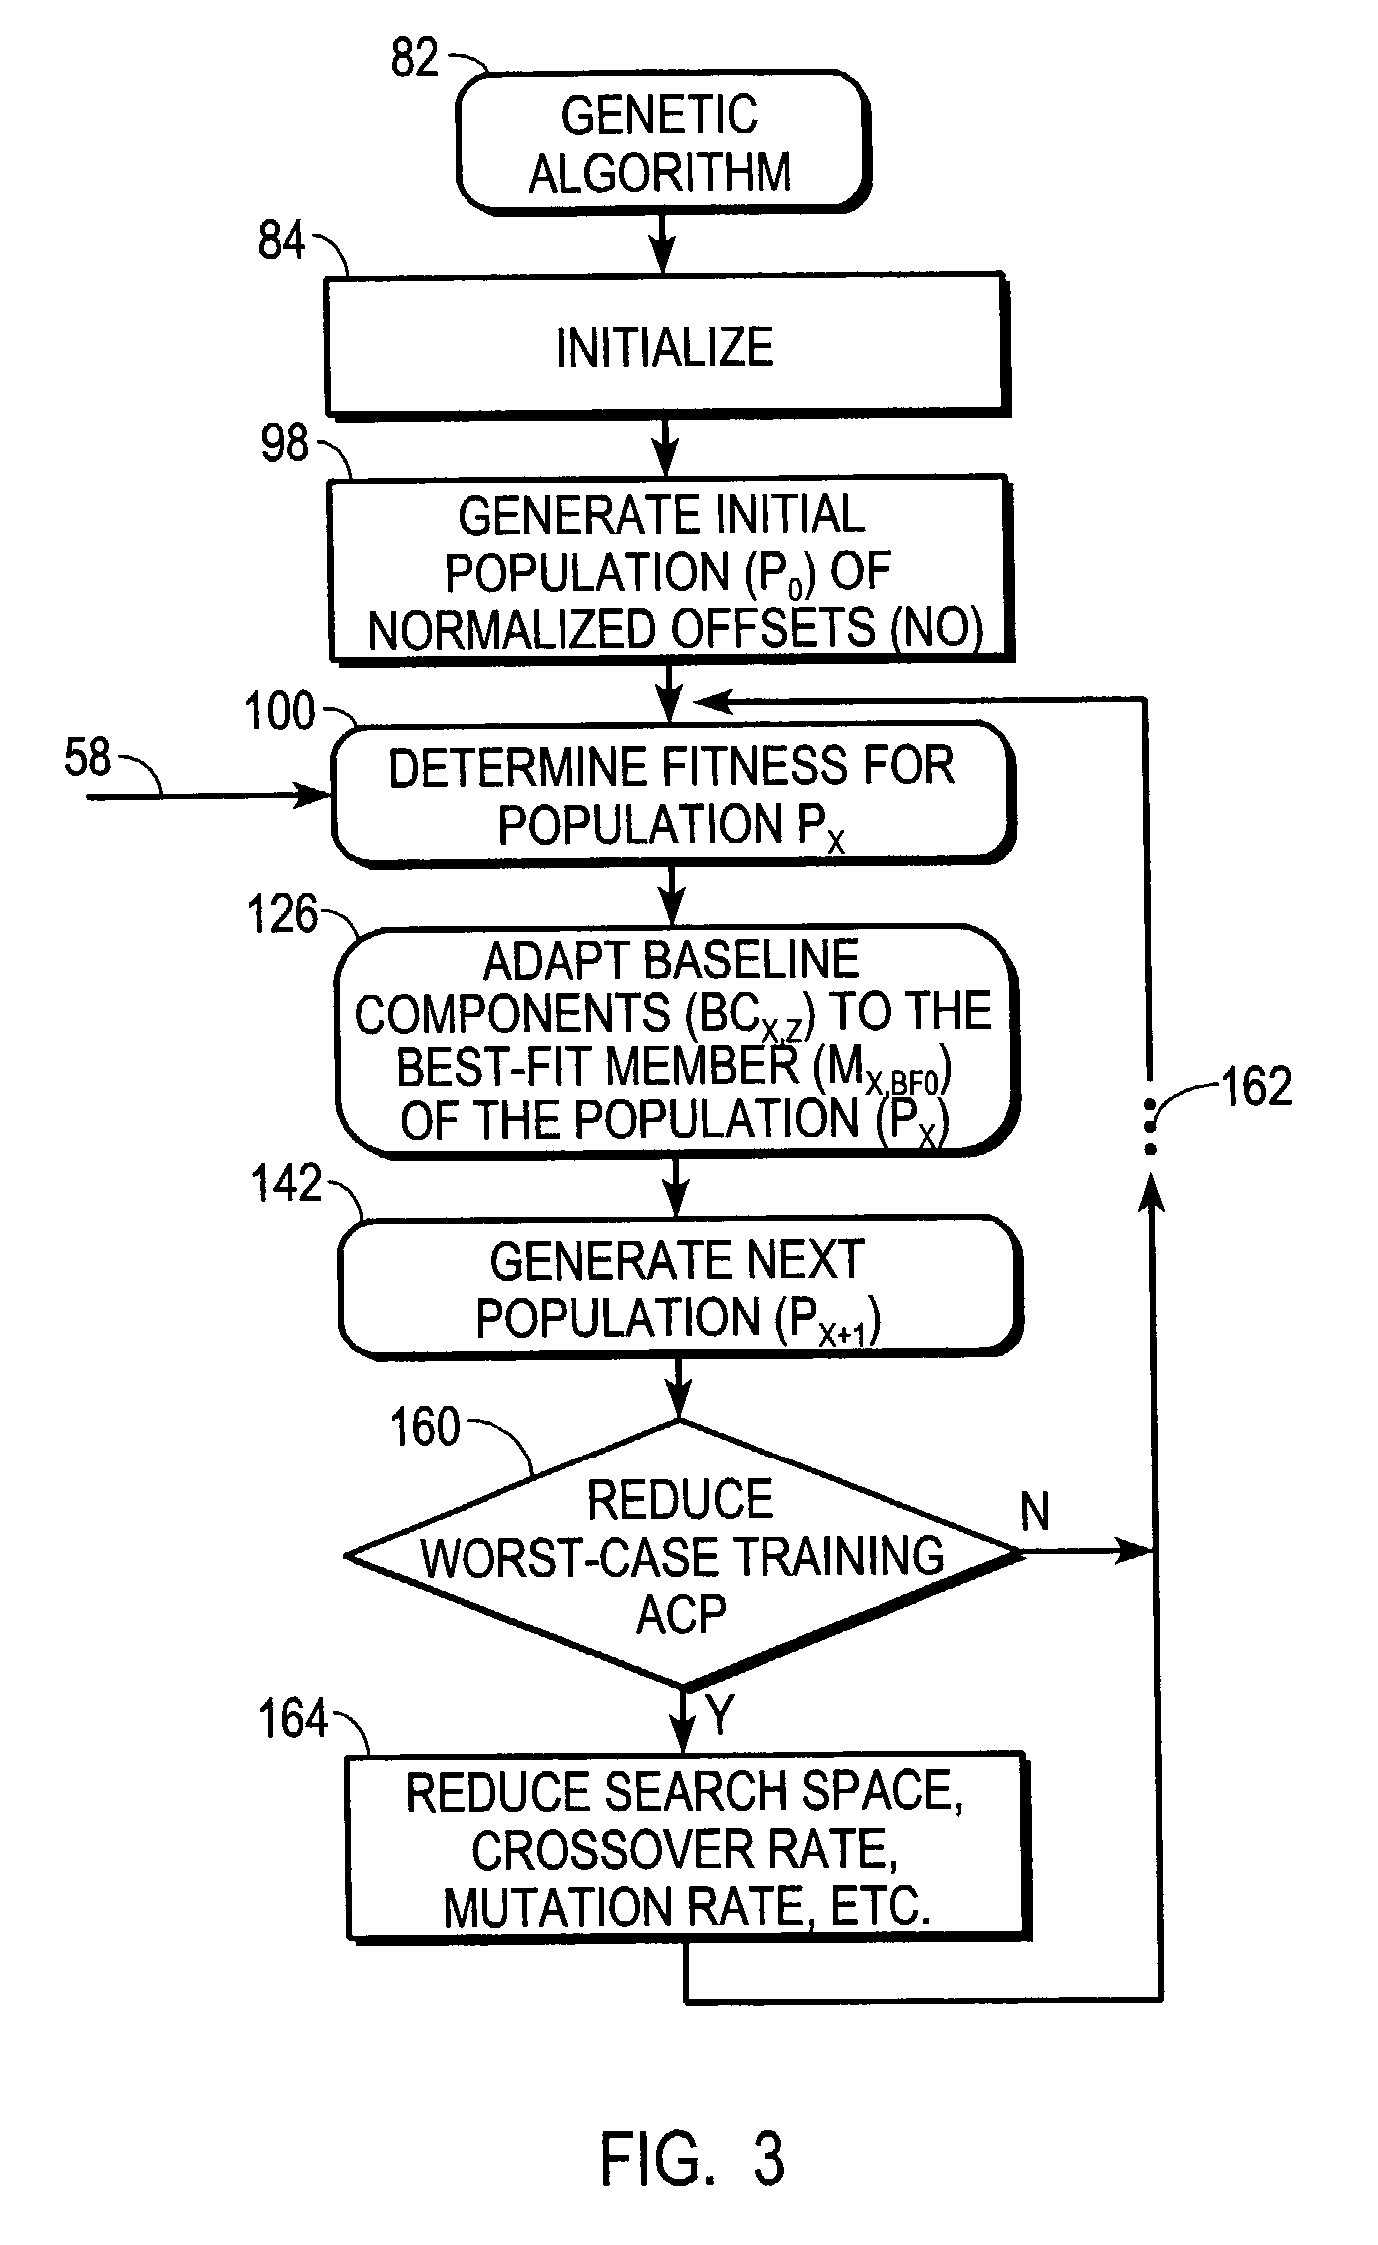 Transmitter with limited spectral regrowth and method therefor